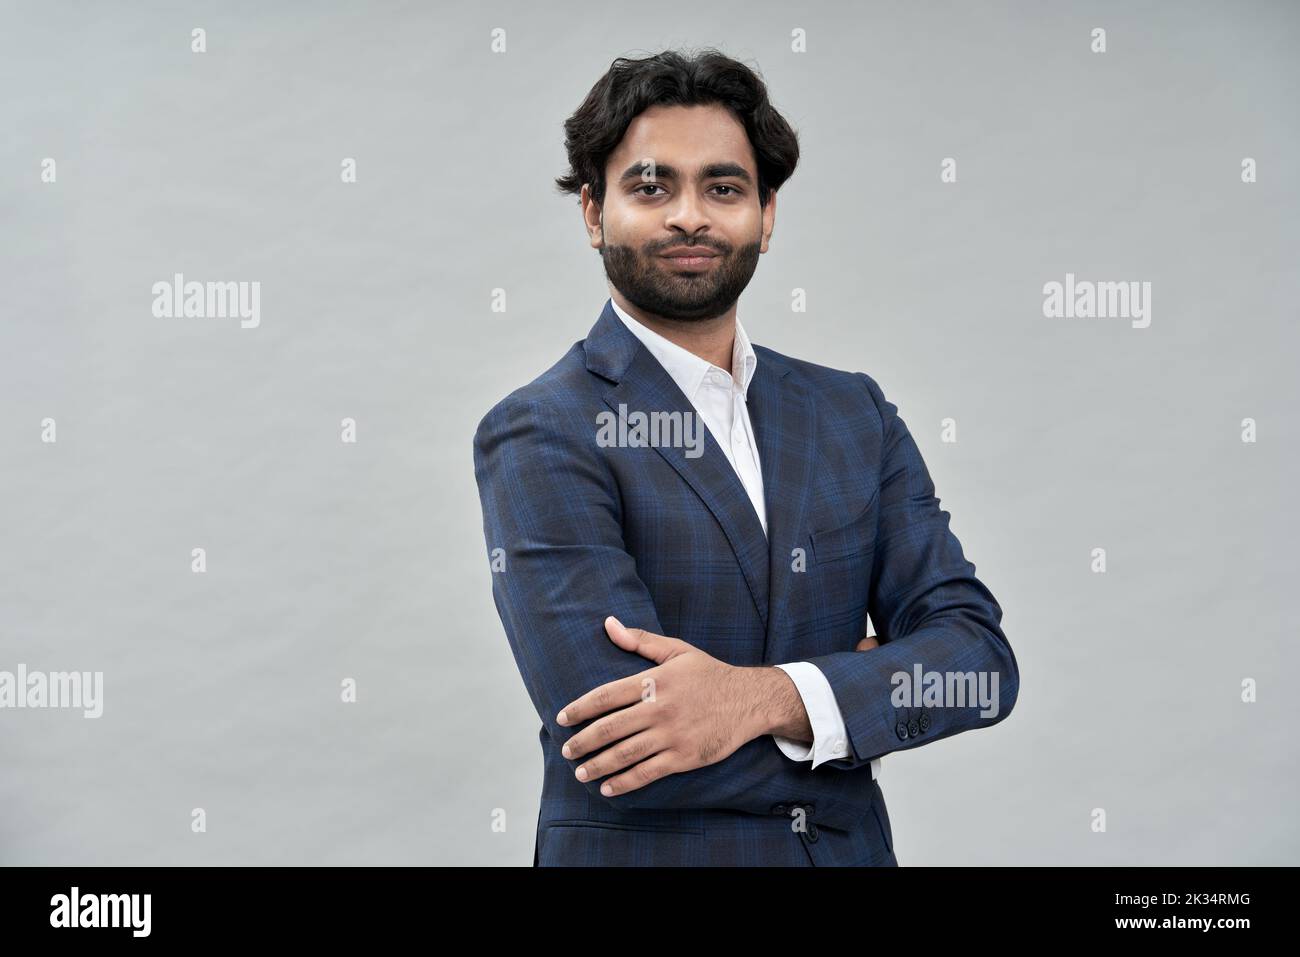 Proud man in military suit Stock Photo - Alamy